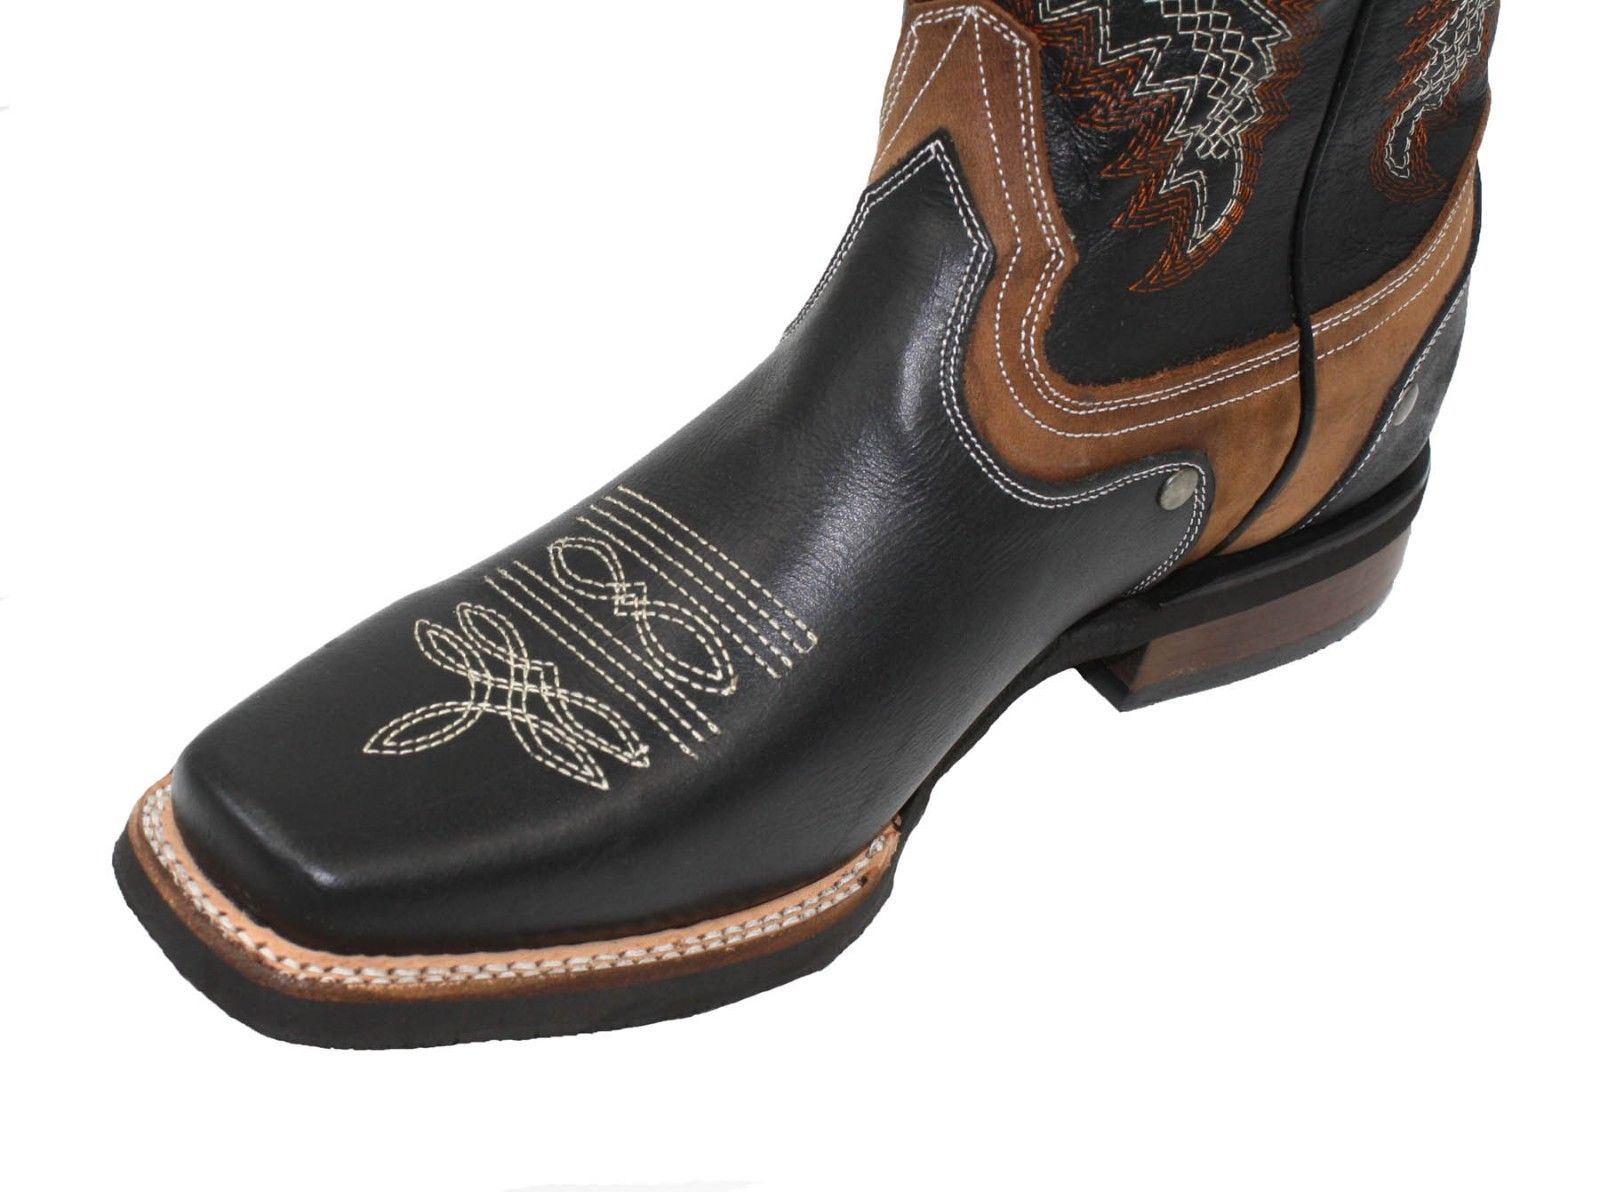 MEN'S RODEO COWBOY BOOTS GENUINE LEATHER WESTERN SQUARE TOE BOTAS-CARR 121